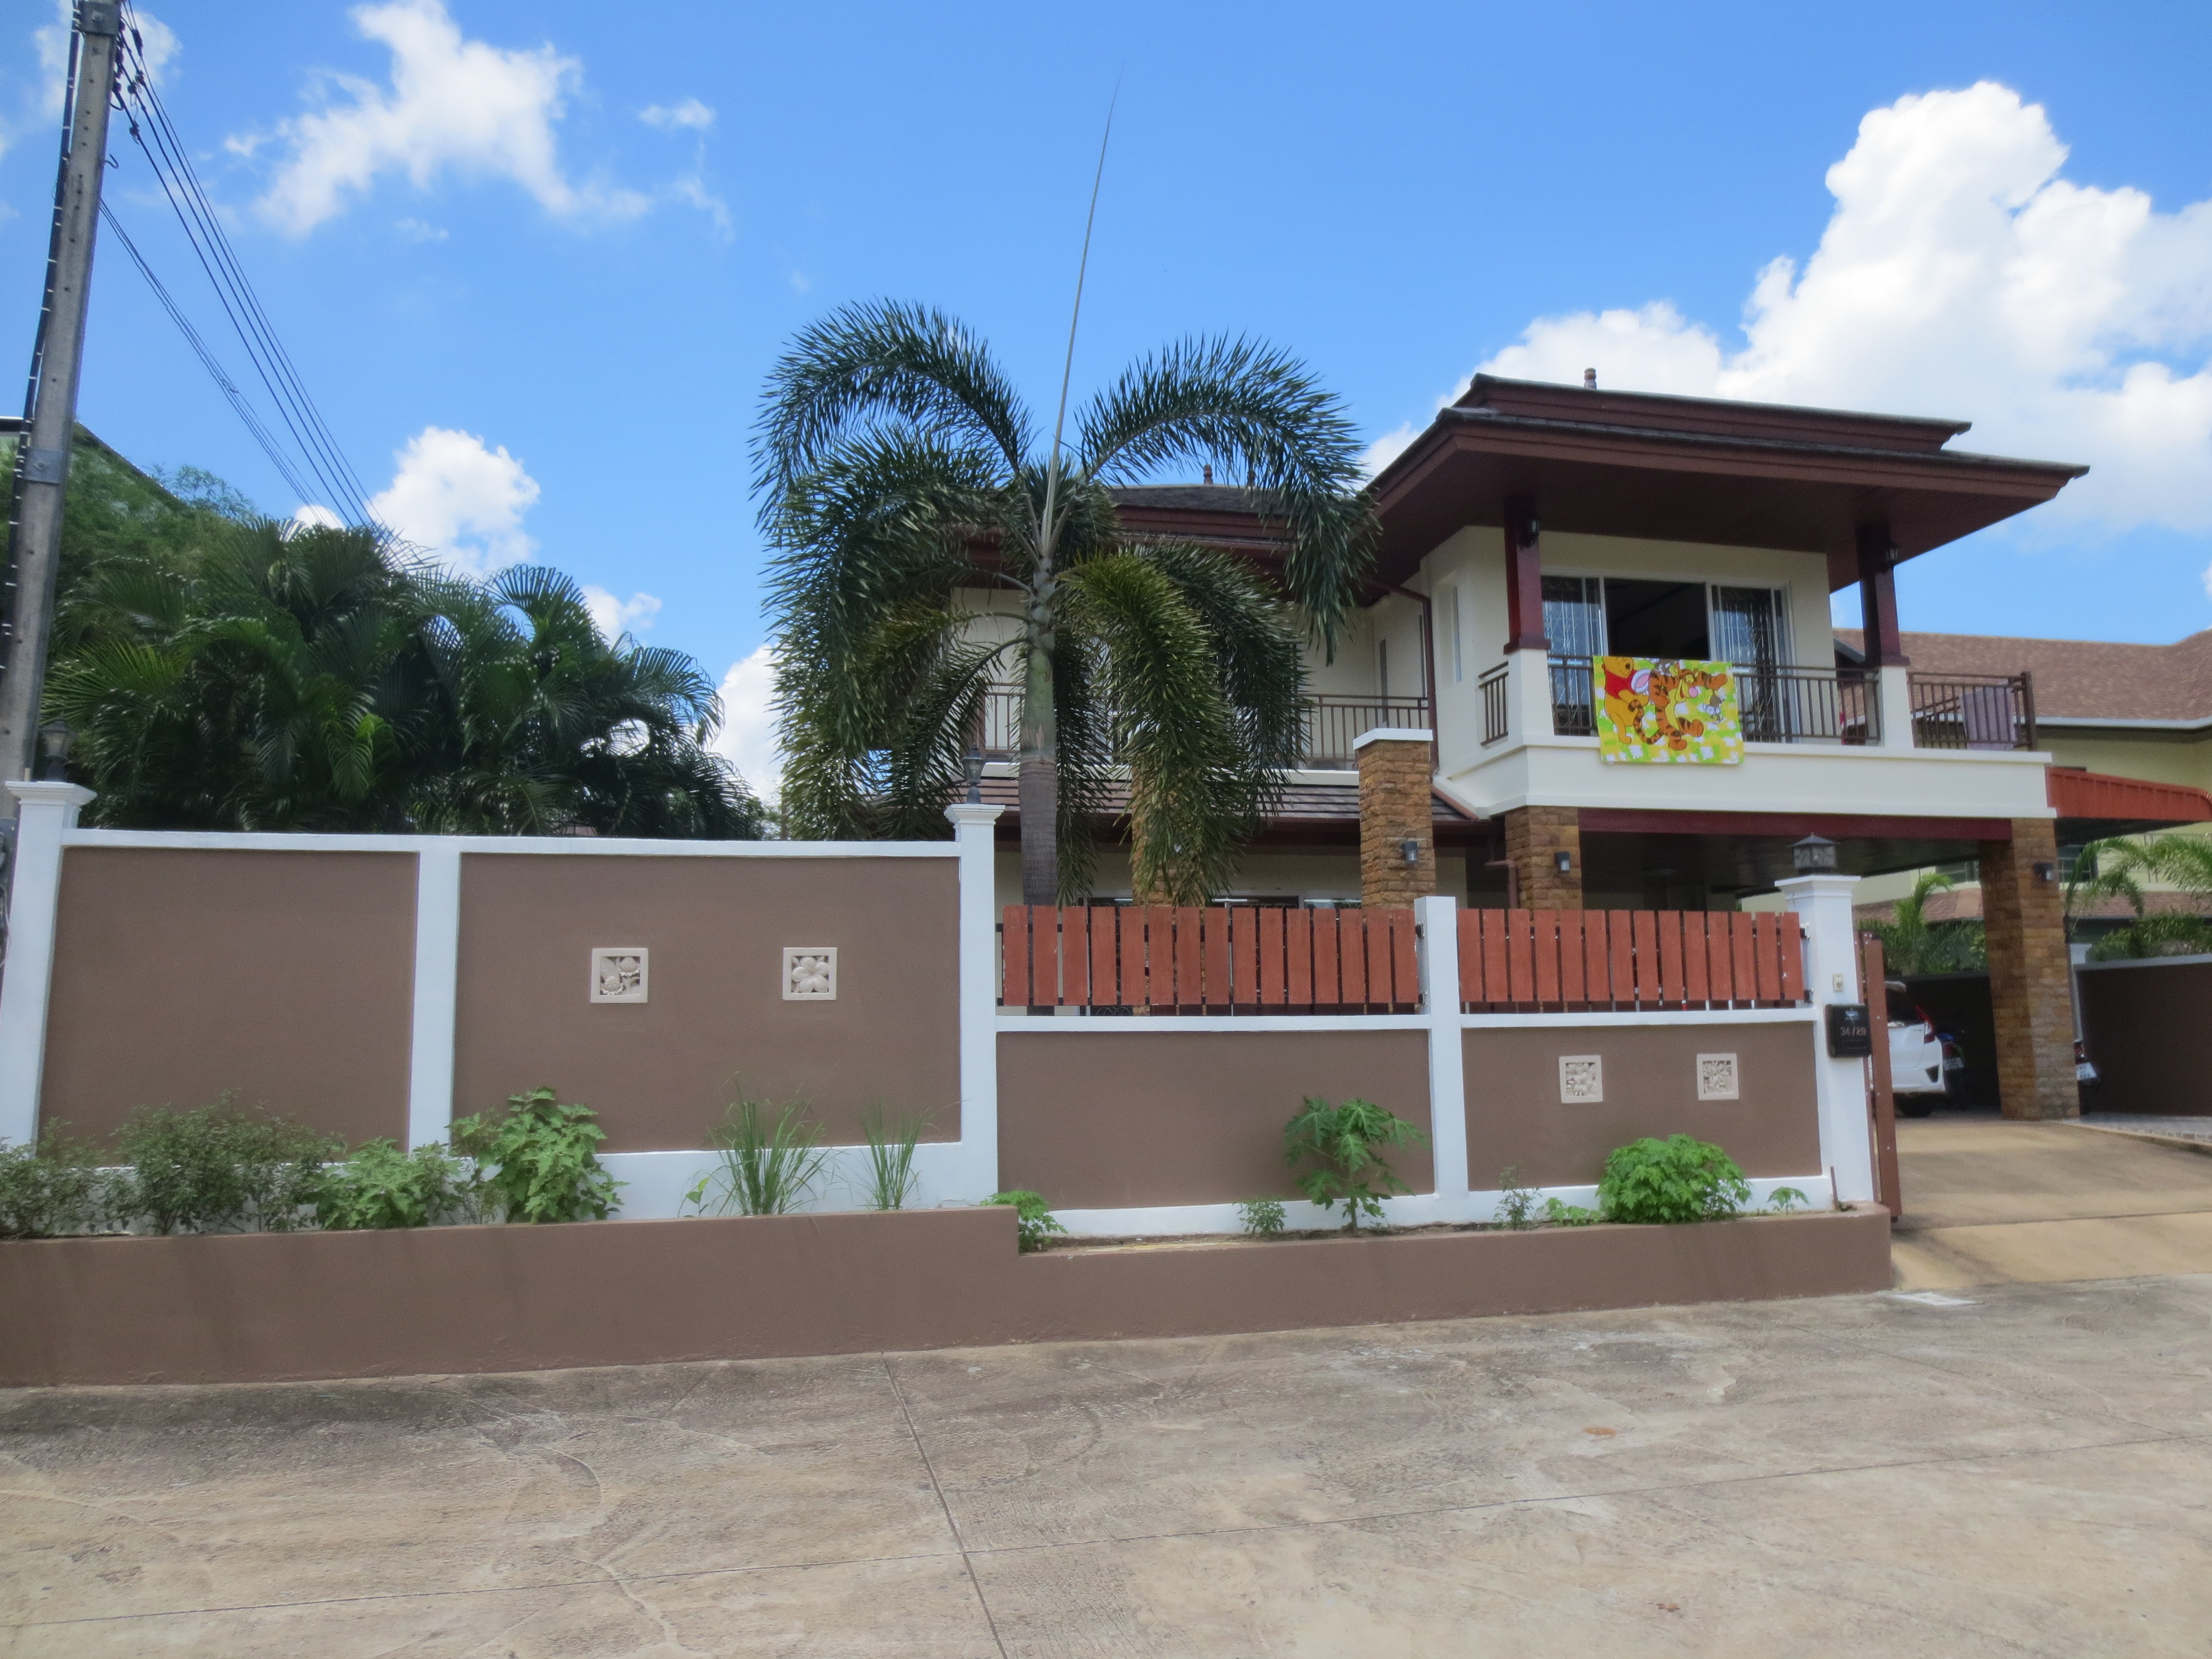 Villa 3 bed 3 bathroom, home offers privacy and security guard in Phuket